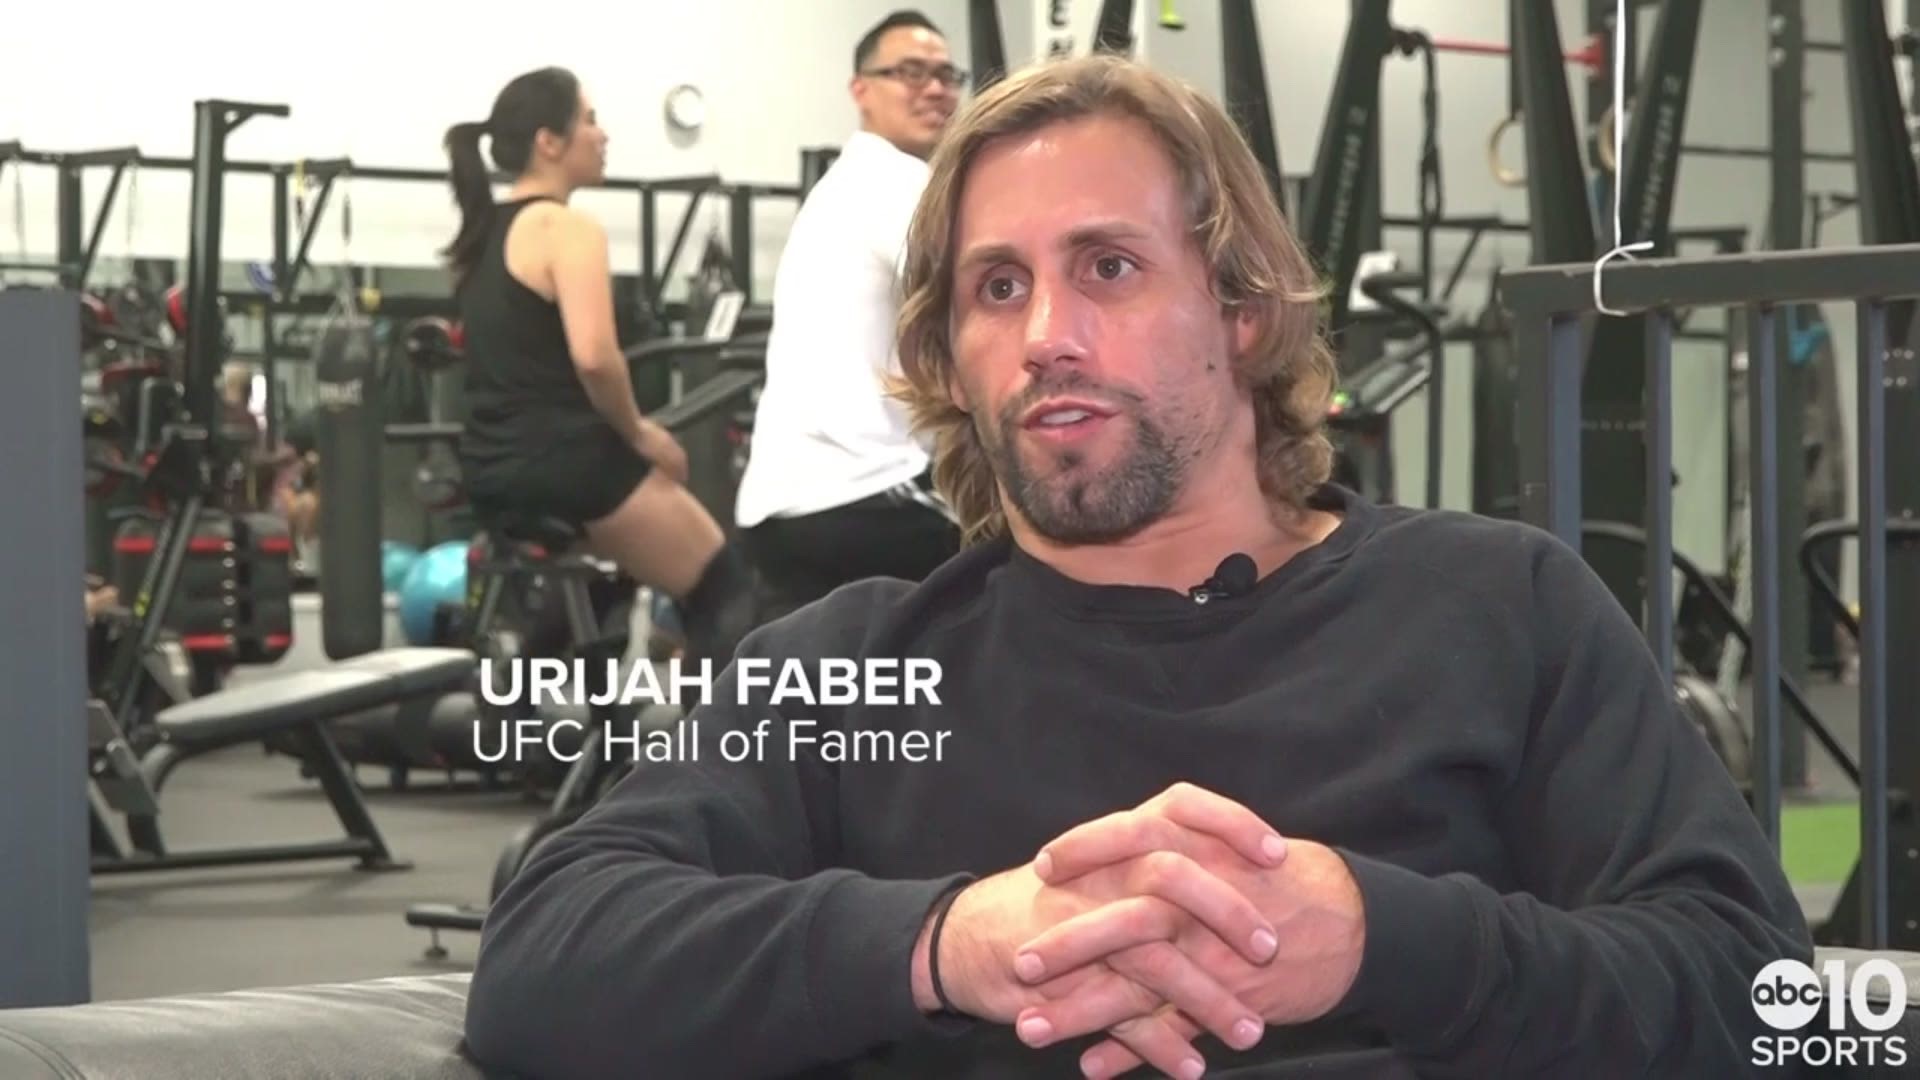 ABC10's Lina Washington sits down with UFC Hall of Famer Urijah Faber who explains how he's helping Team Alpha Male fighter Vince Murdock prepare for brain surgery.